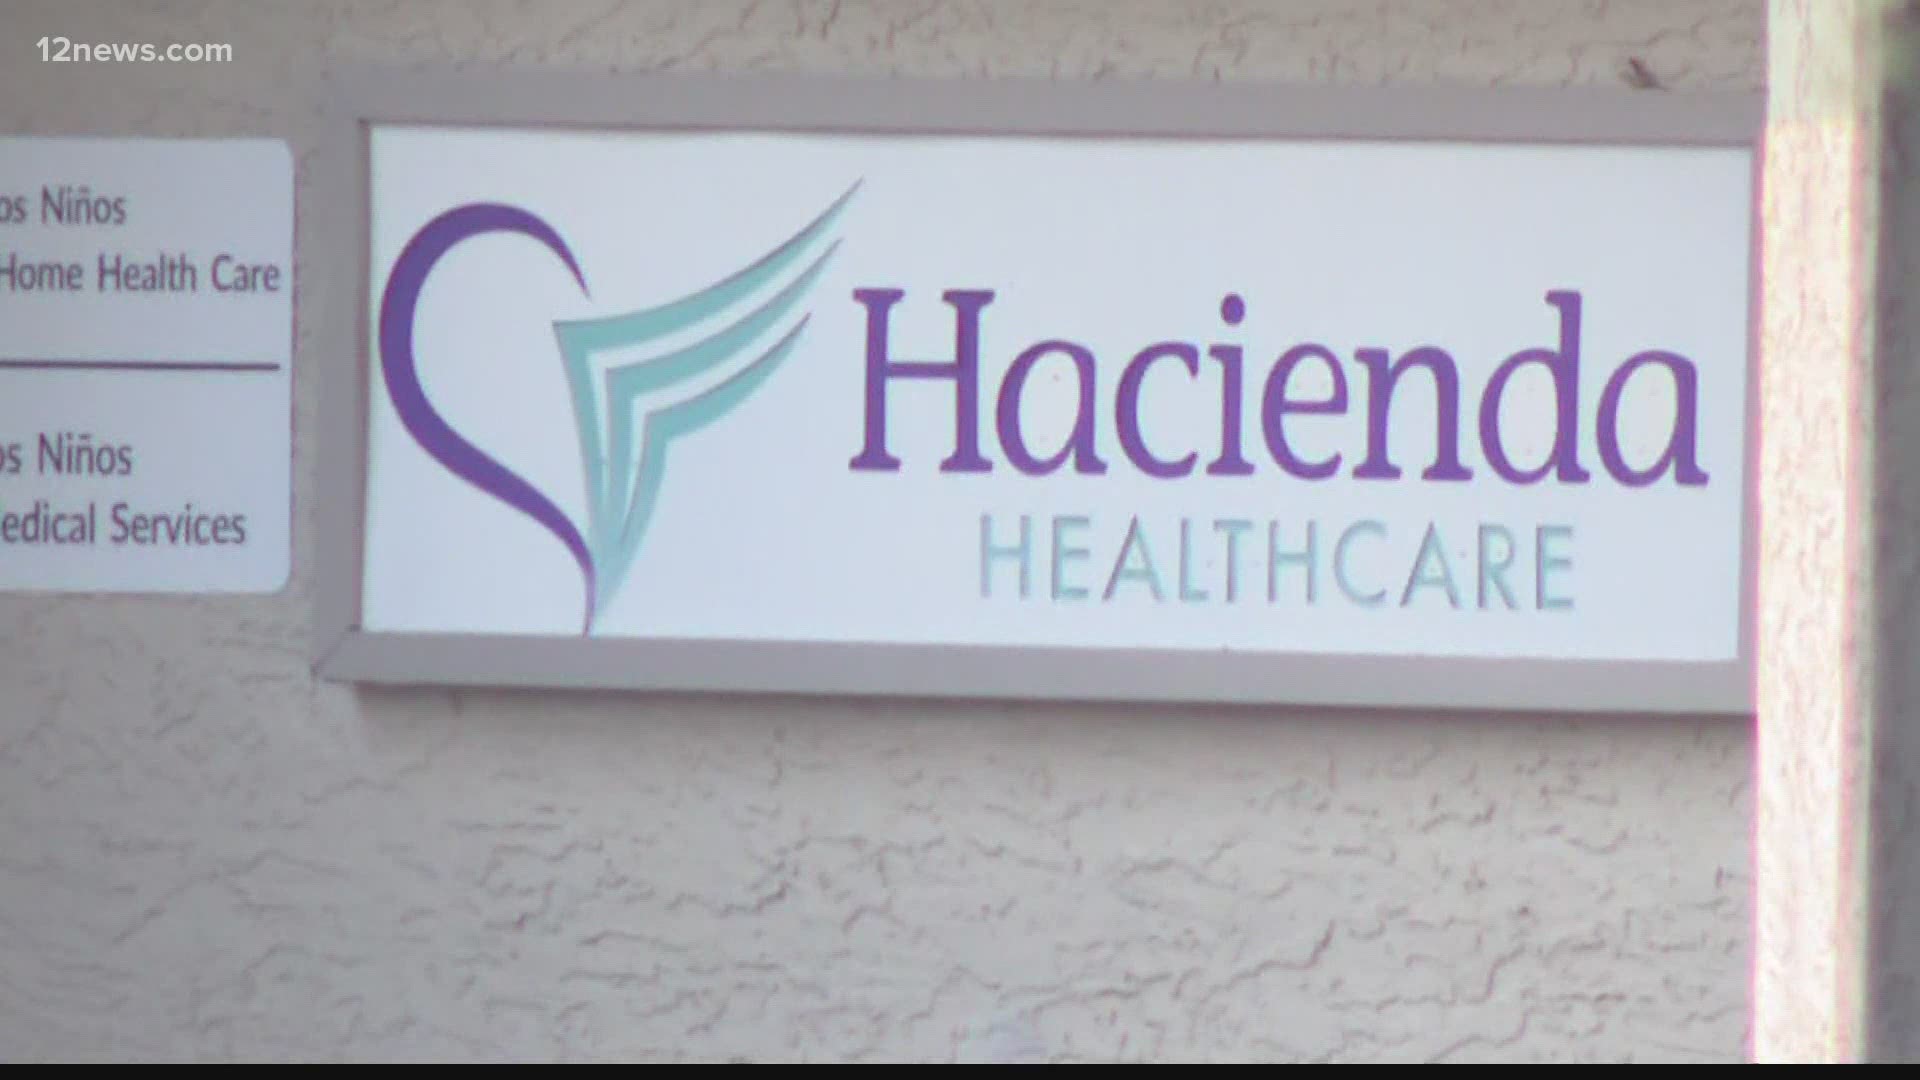 The settlement made on behalf of Dr. Phillip Gear was deemed reasonable by a judge. Gear cared for the woman for 26 years while she lived at Hacienda Healthcare.